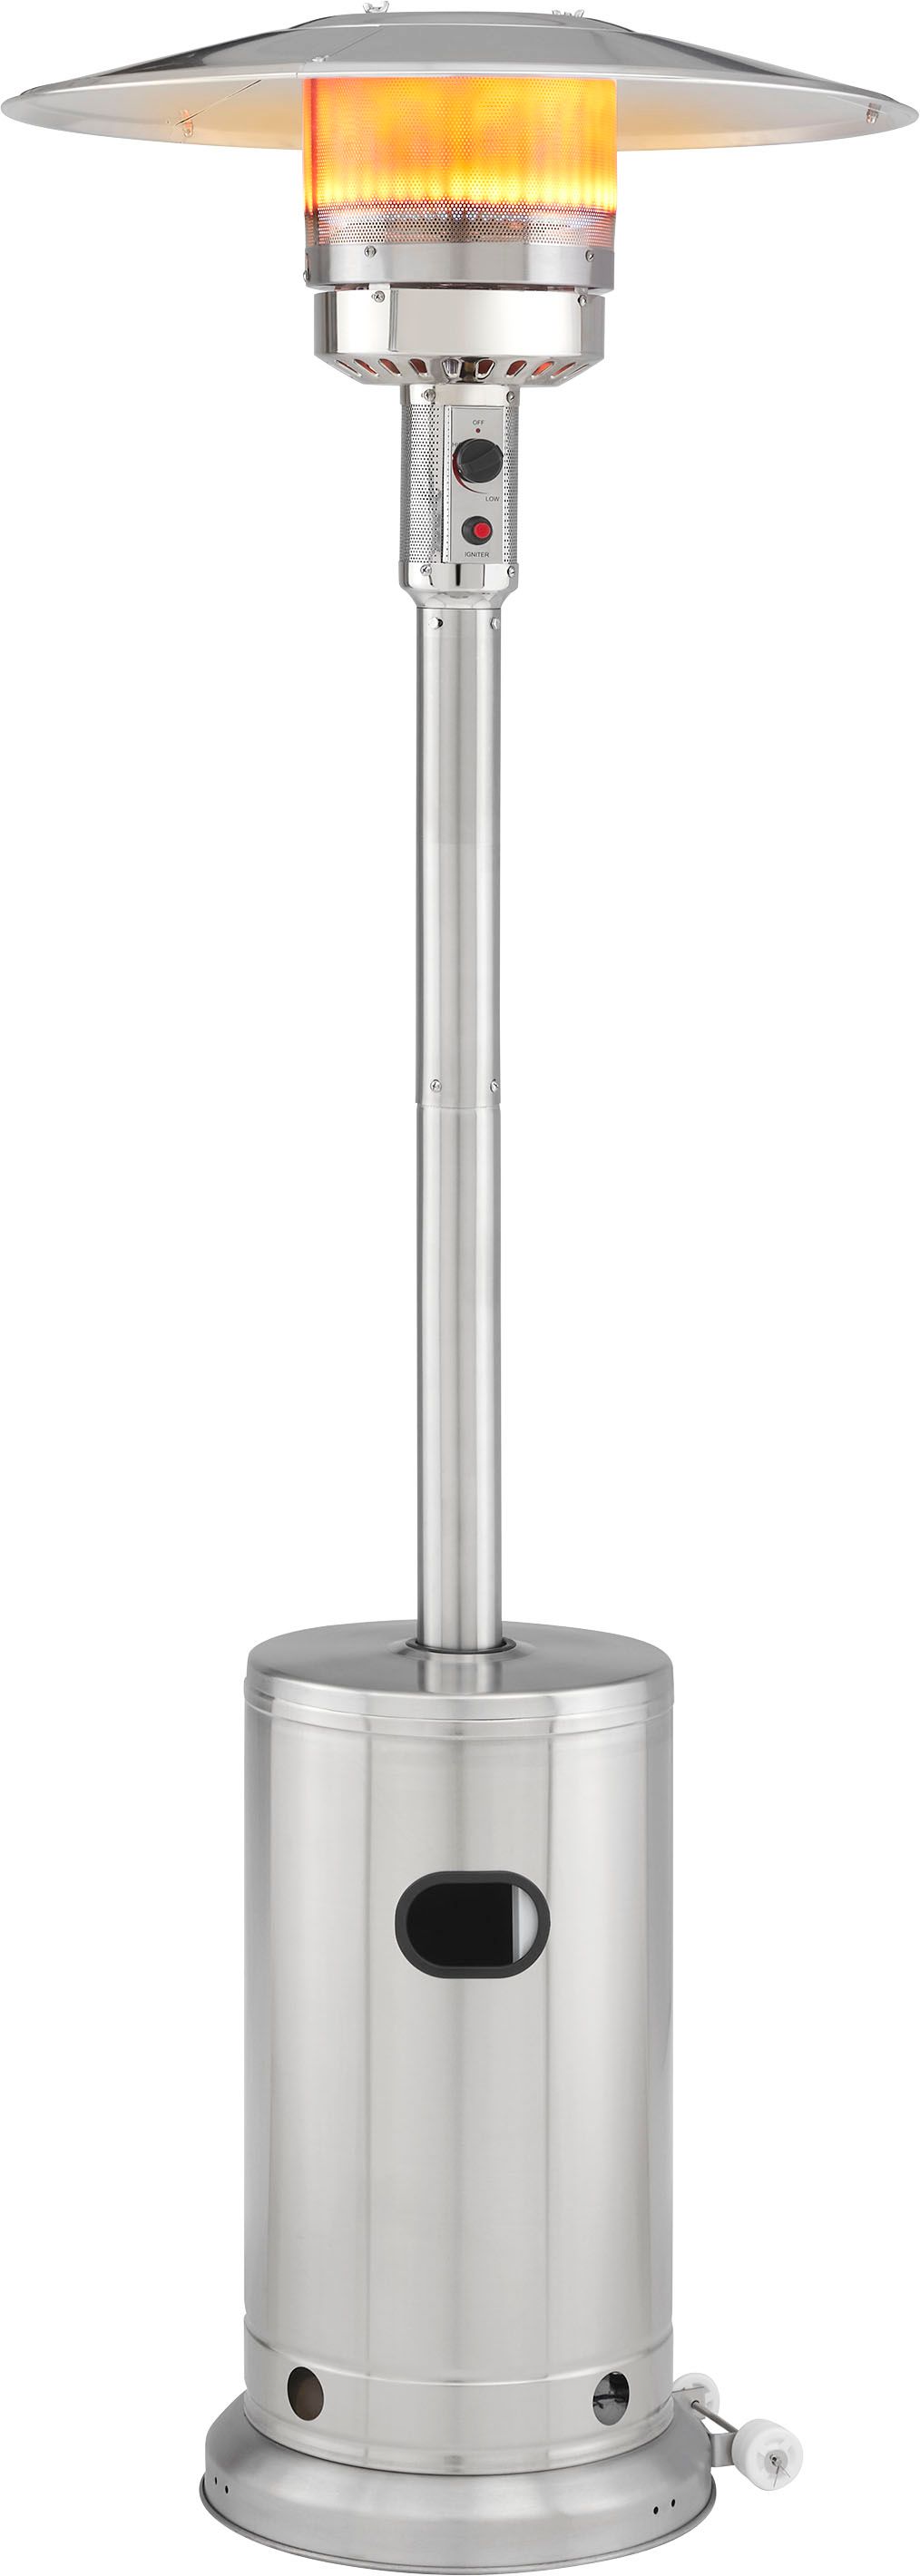 Insignia™ Standing Patio Heater Stainless Steel NS-PSH48SS3 - Best Buy | Best Buy U.S.